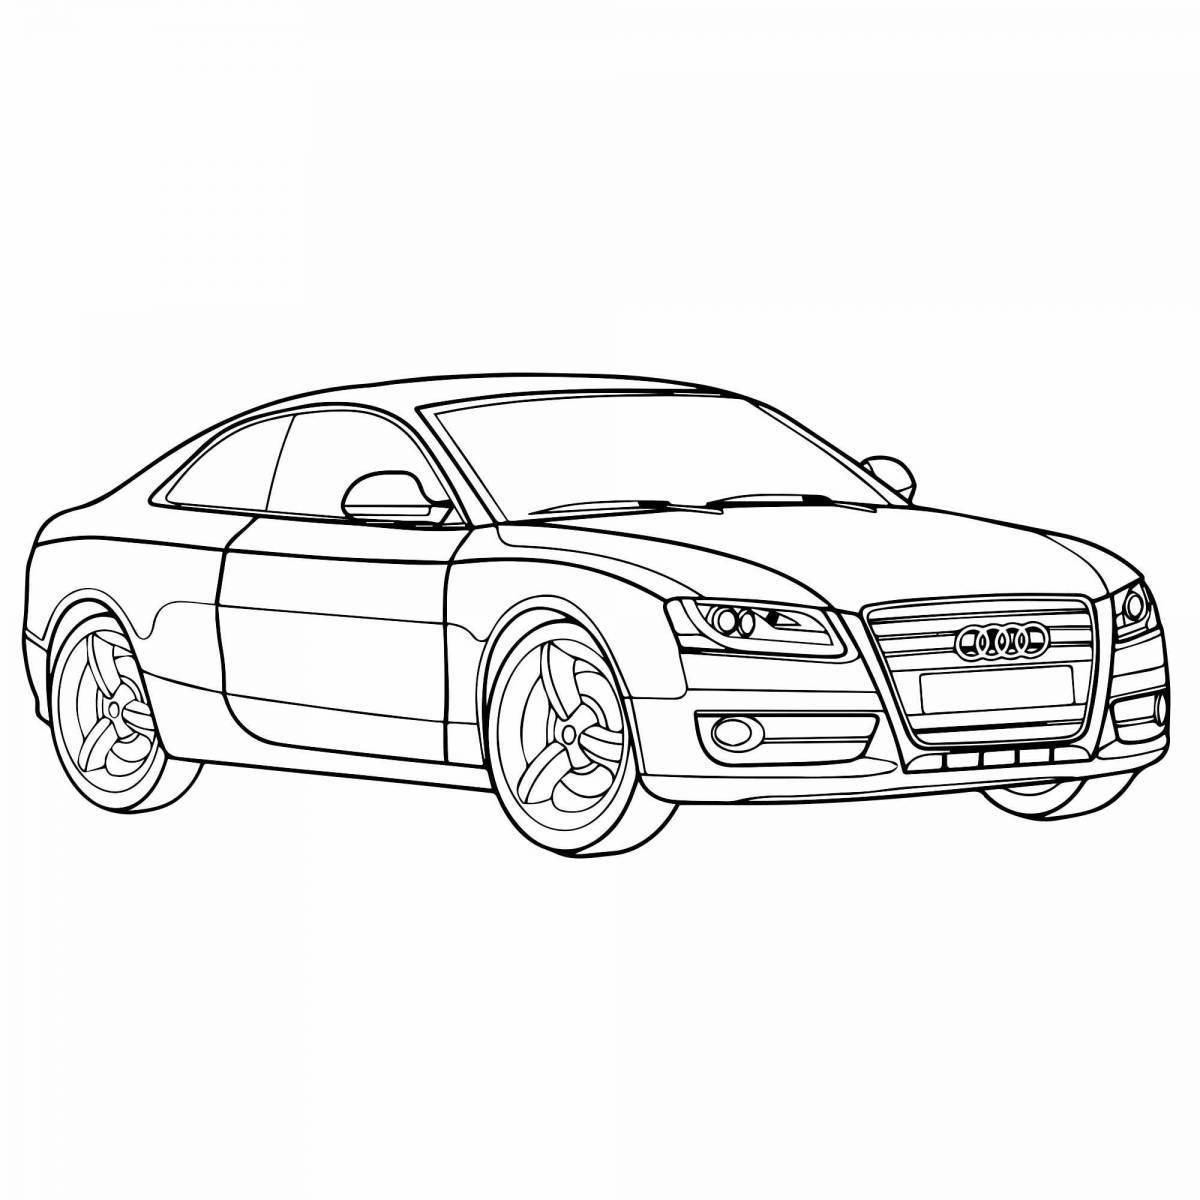 Dynamic car coloring page